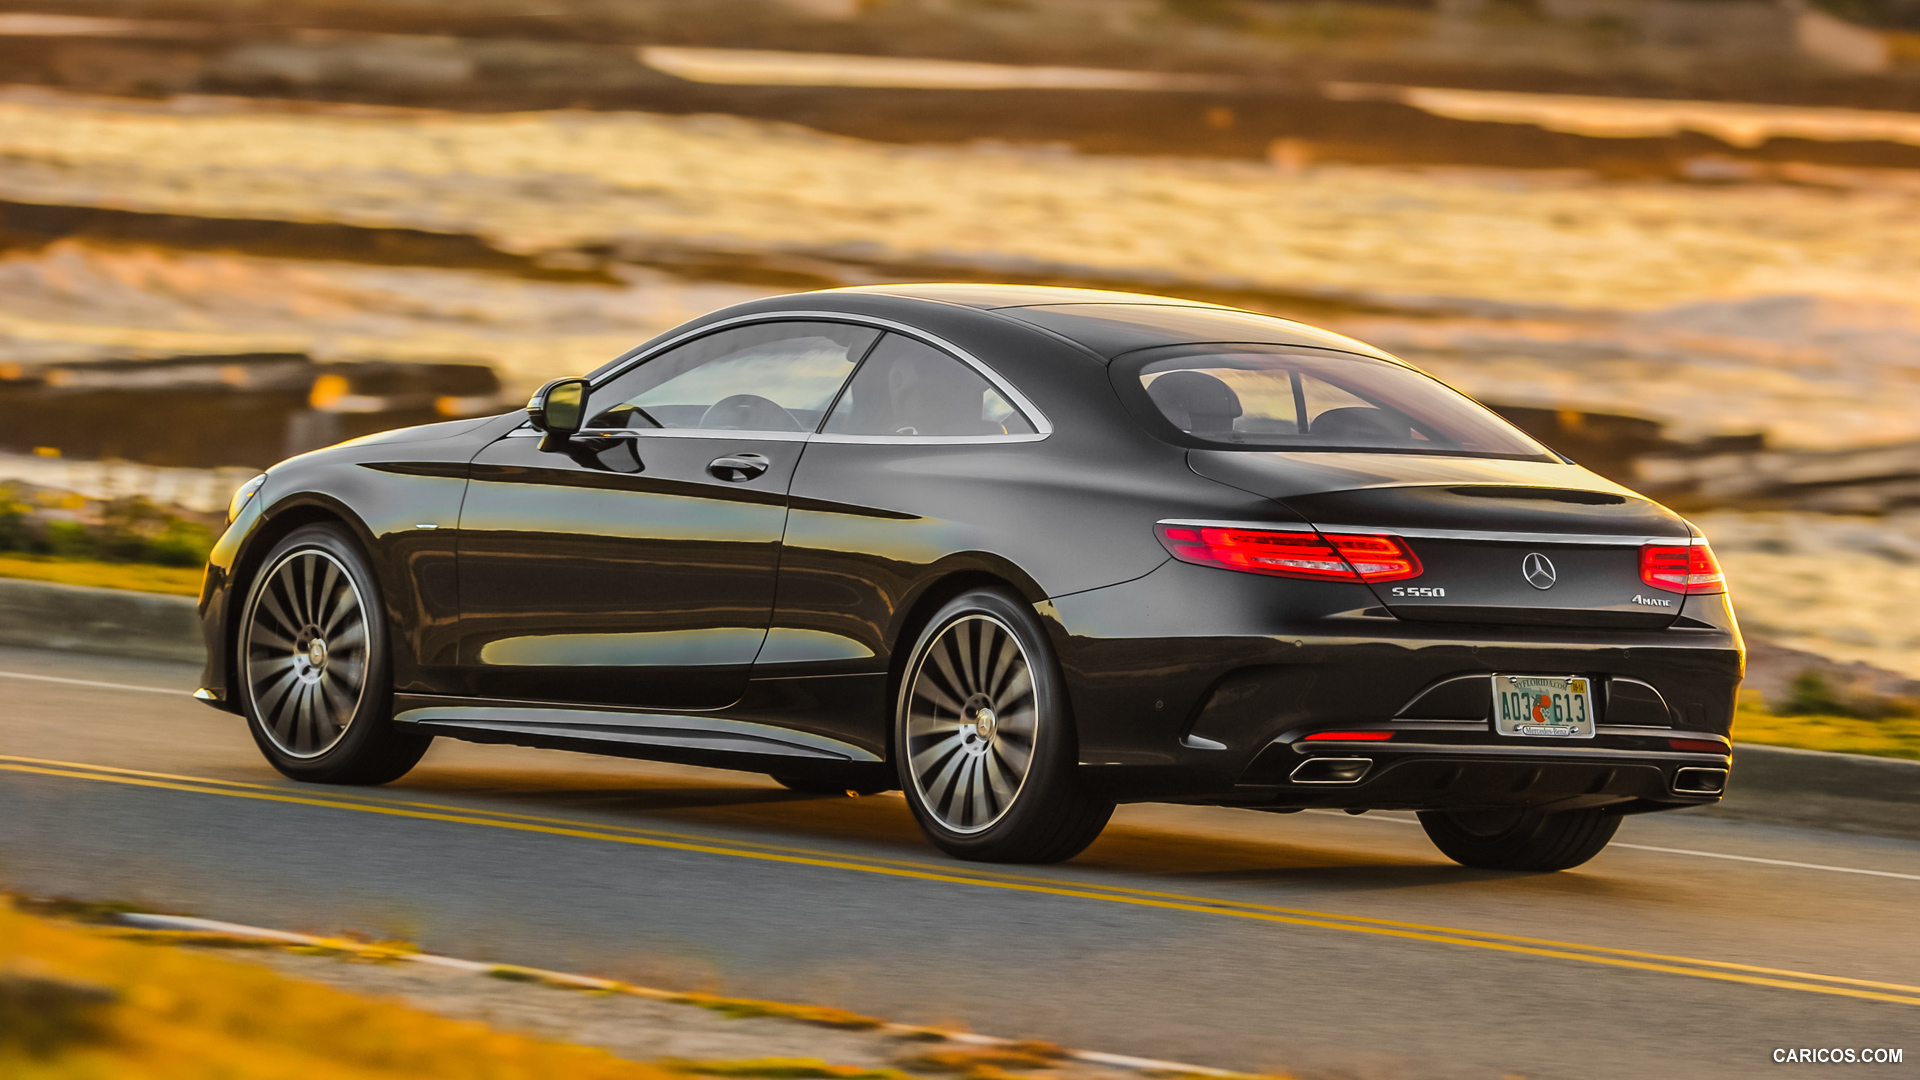 2015 Mercedes-Benz S550 4MATIC Coupe  - Rear, #19 of 60